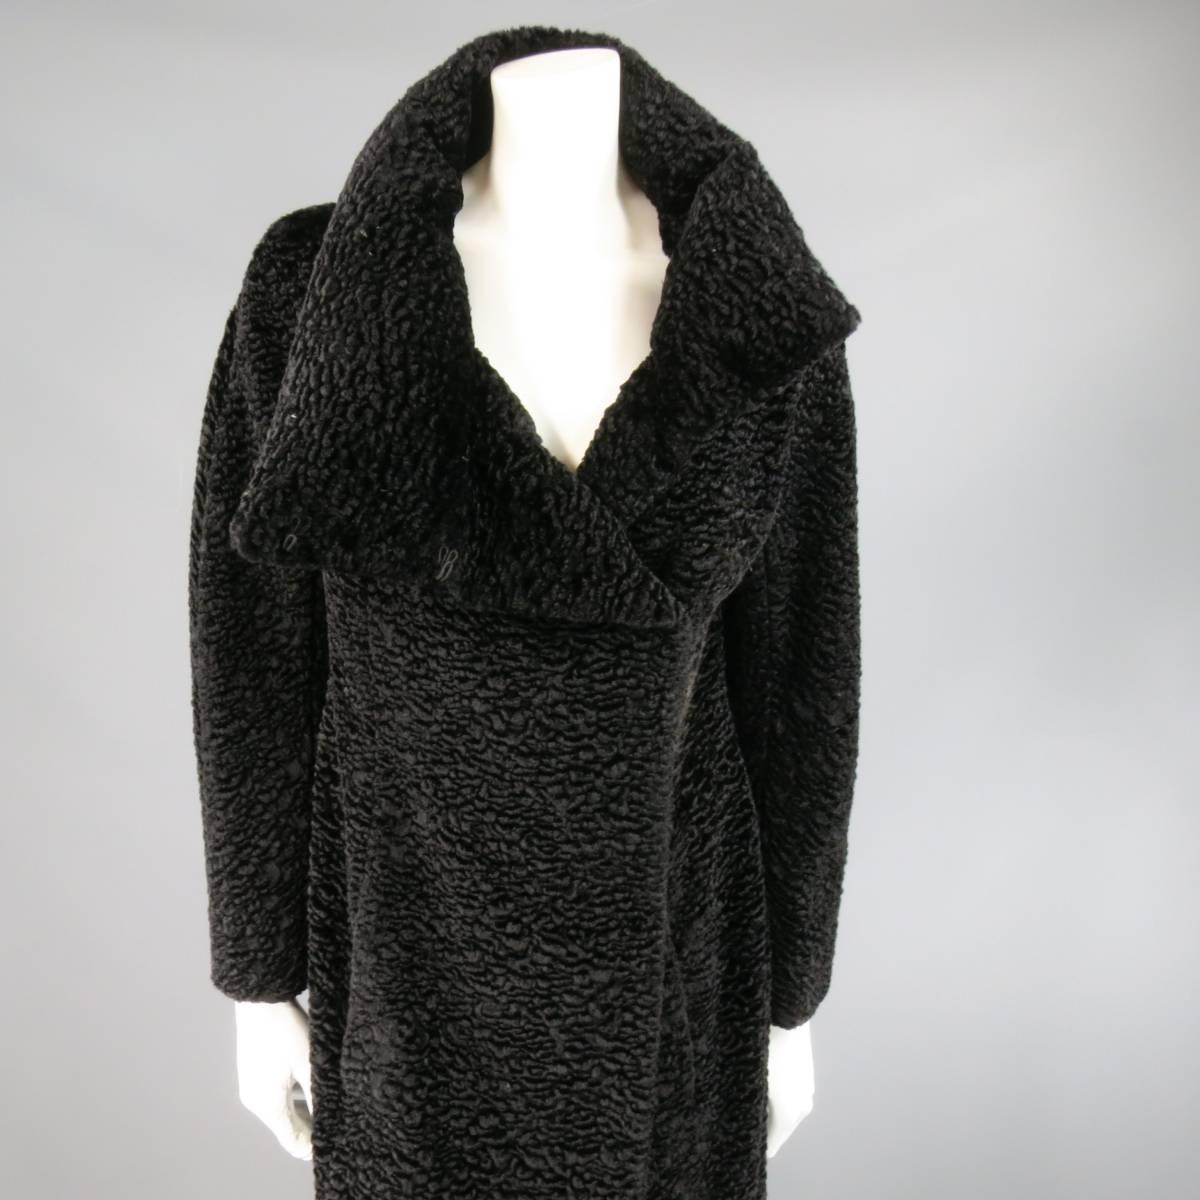 This stunning RICHARD TYLER COUTURE winter coat comes in a black cotton blend faux lamb fur textured fabric and features an A-line silhouette, asymmetrical hidden hook eye closure, slanted slit pockets, and round padded stand up collar. Mad in